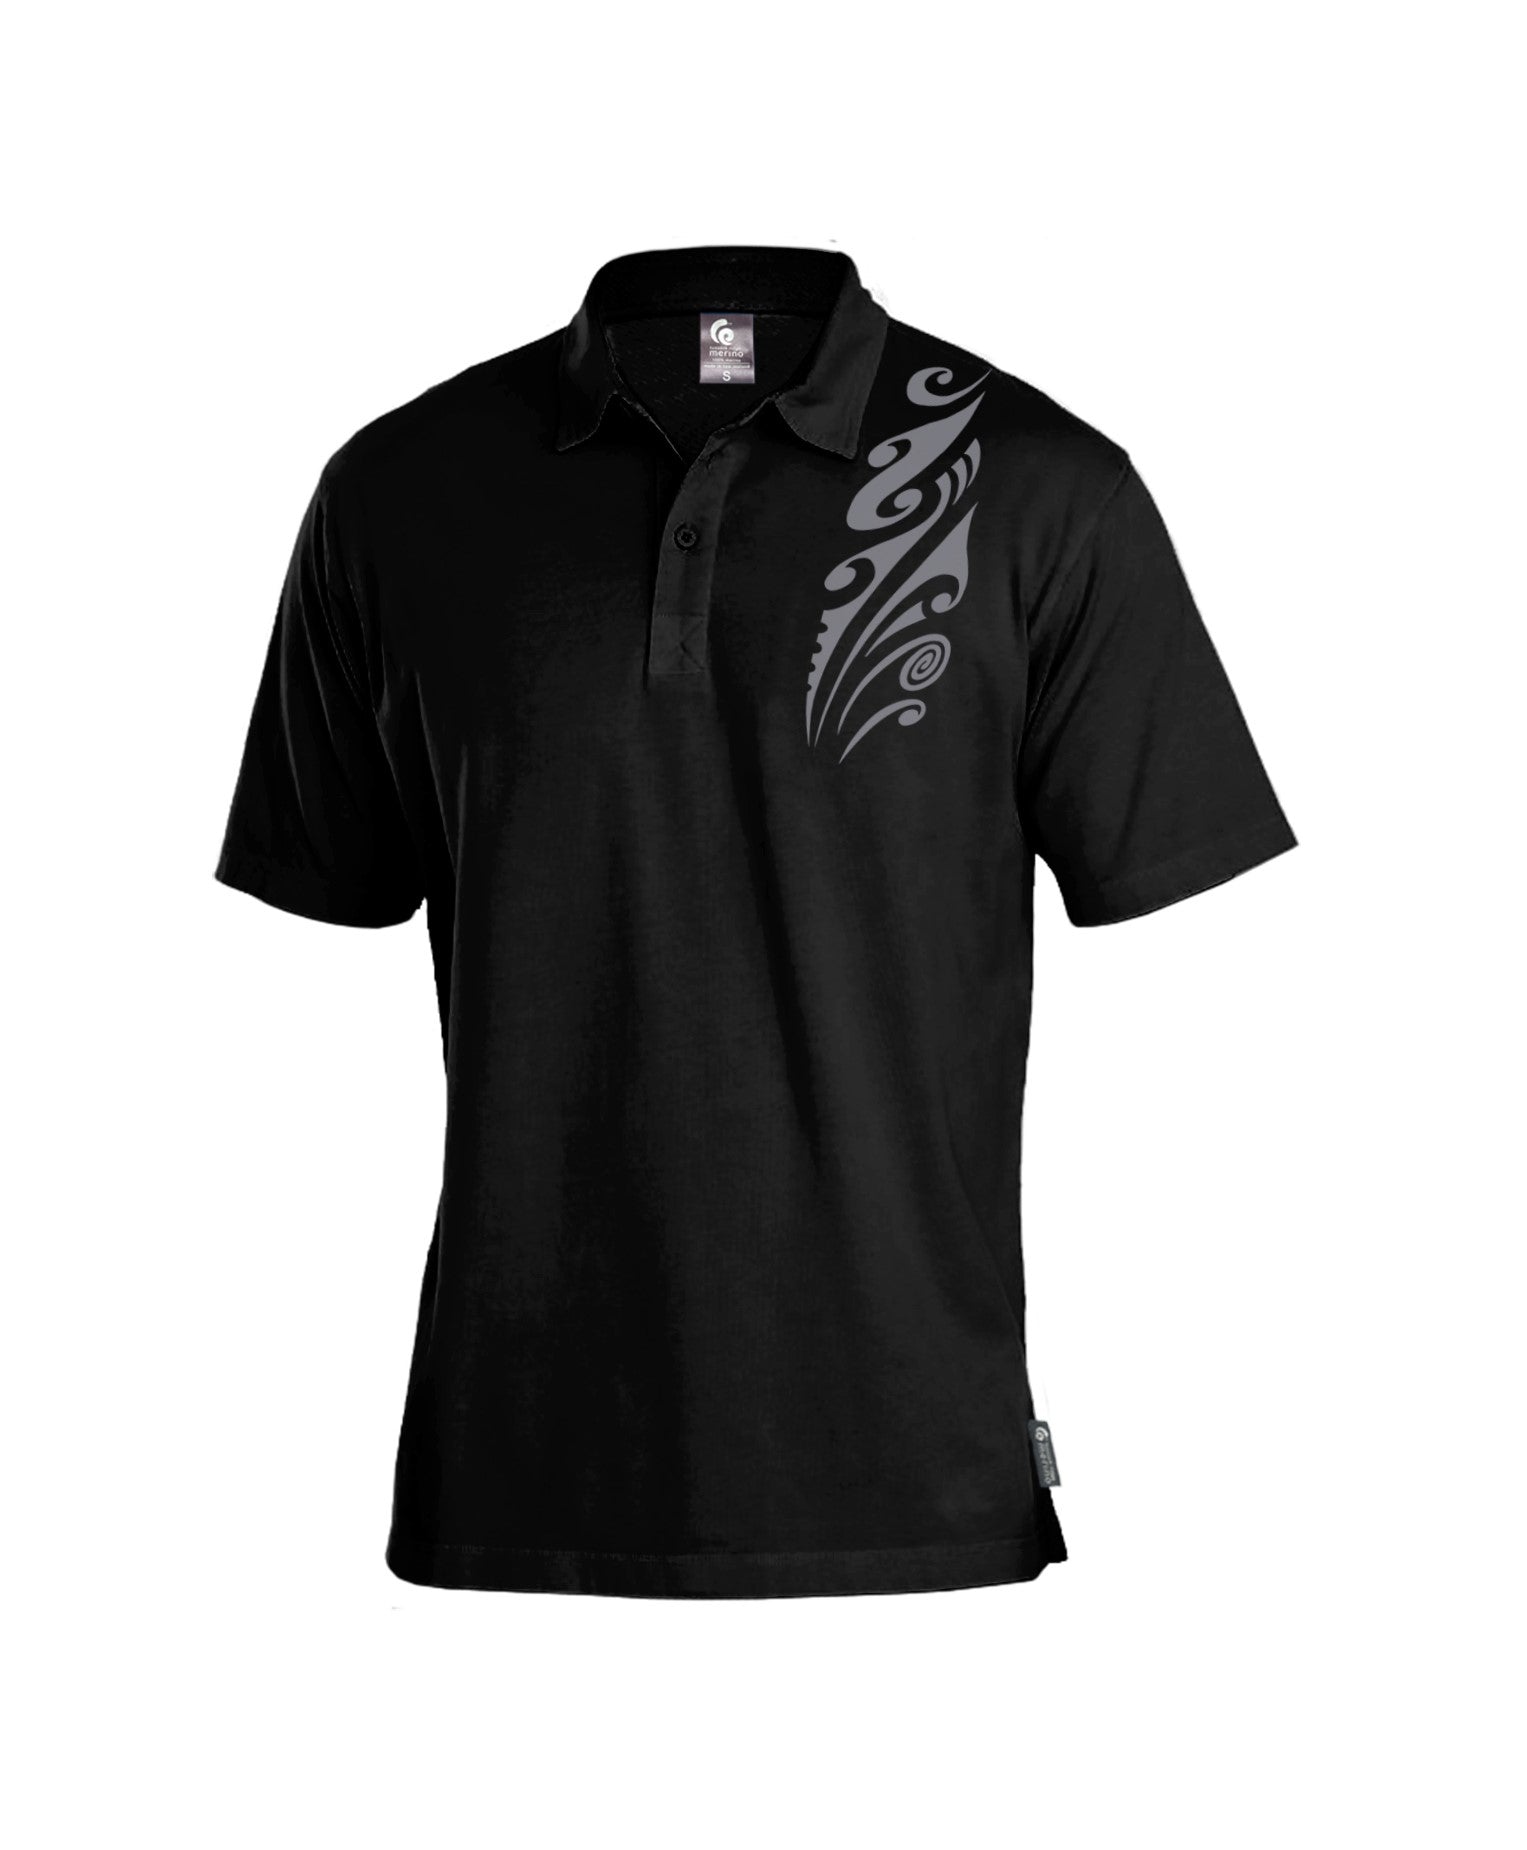 Merino Men's Black Polo With Print. Made in New Zealand.